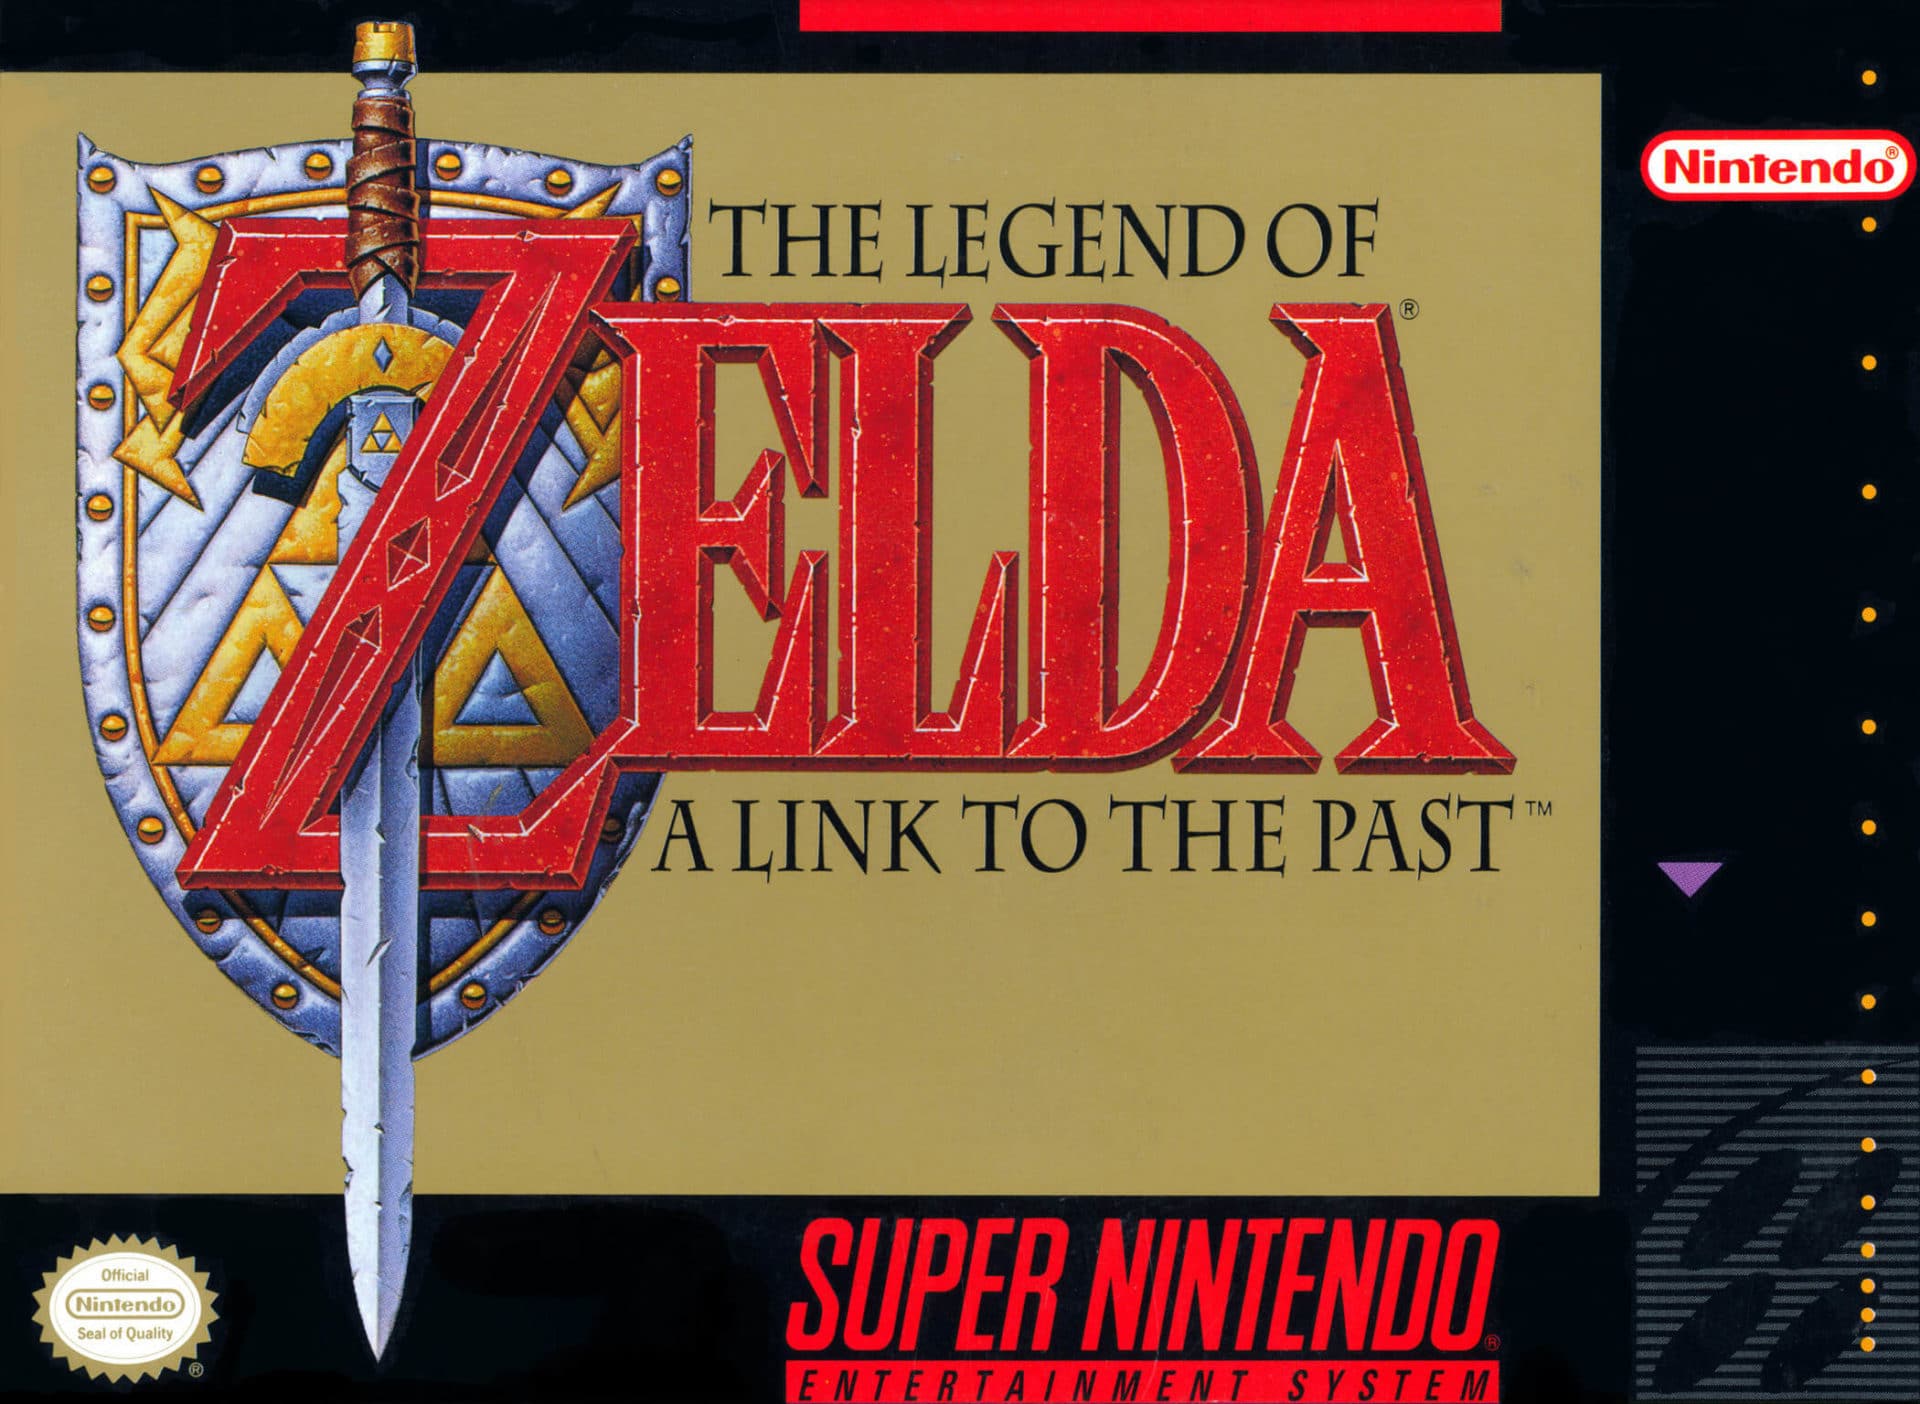 The Legend of Zelda – A Link to the Past